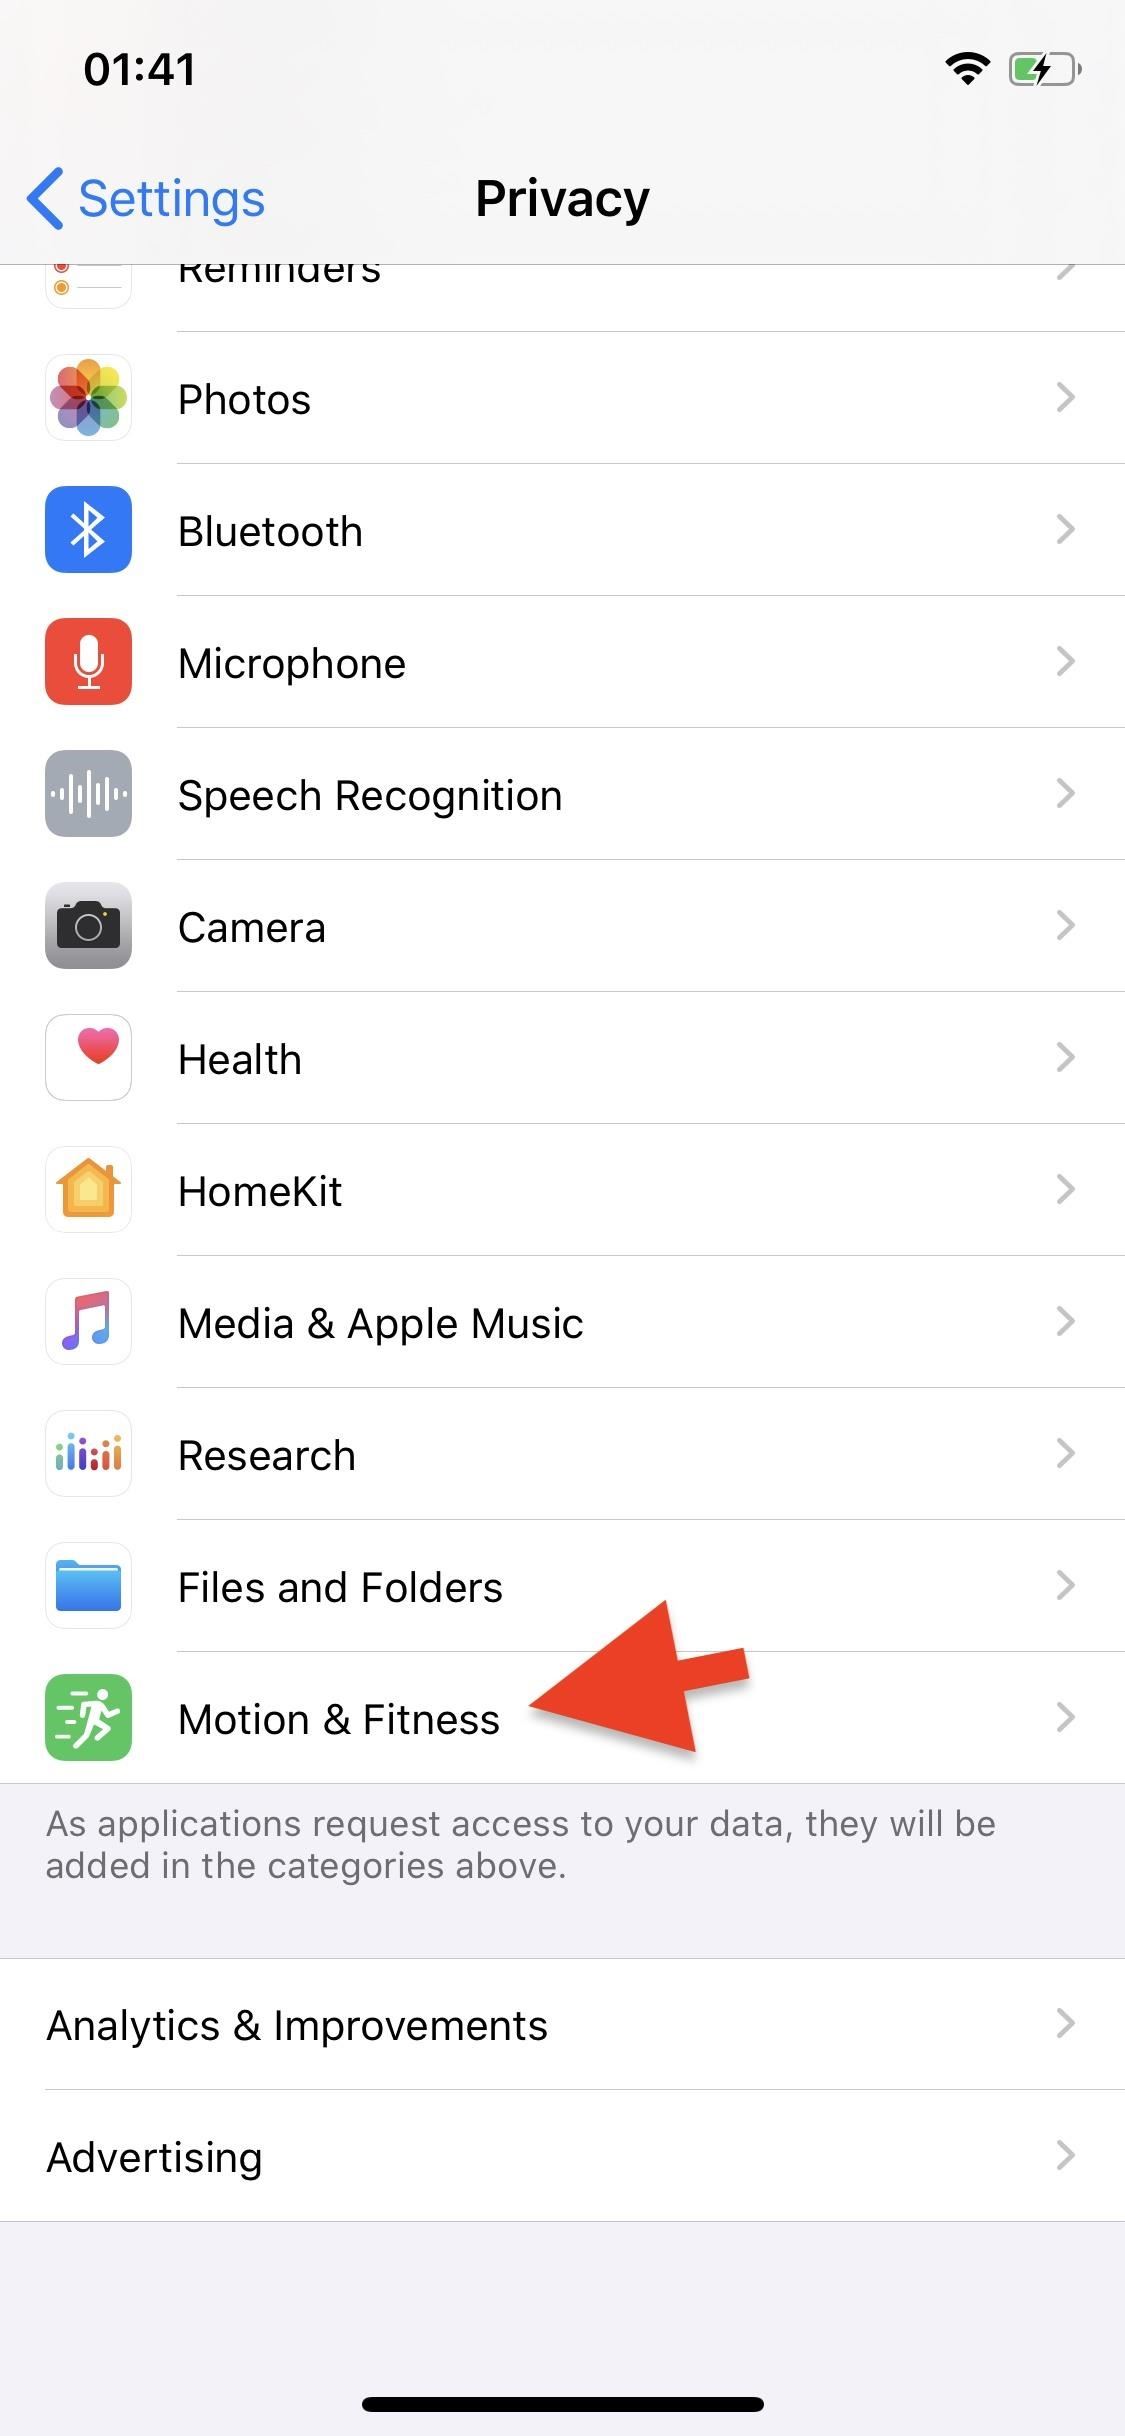 How to Stop Your iPhone from Counting Steps & Tracking Fitness Activity